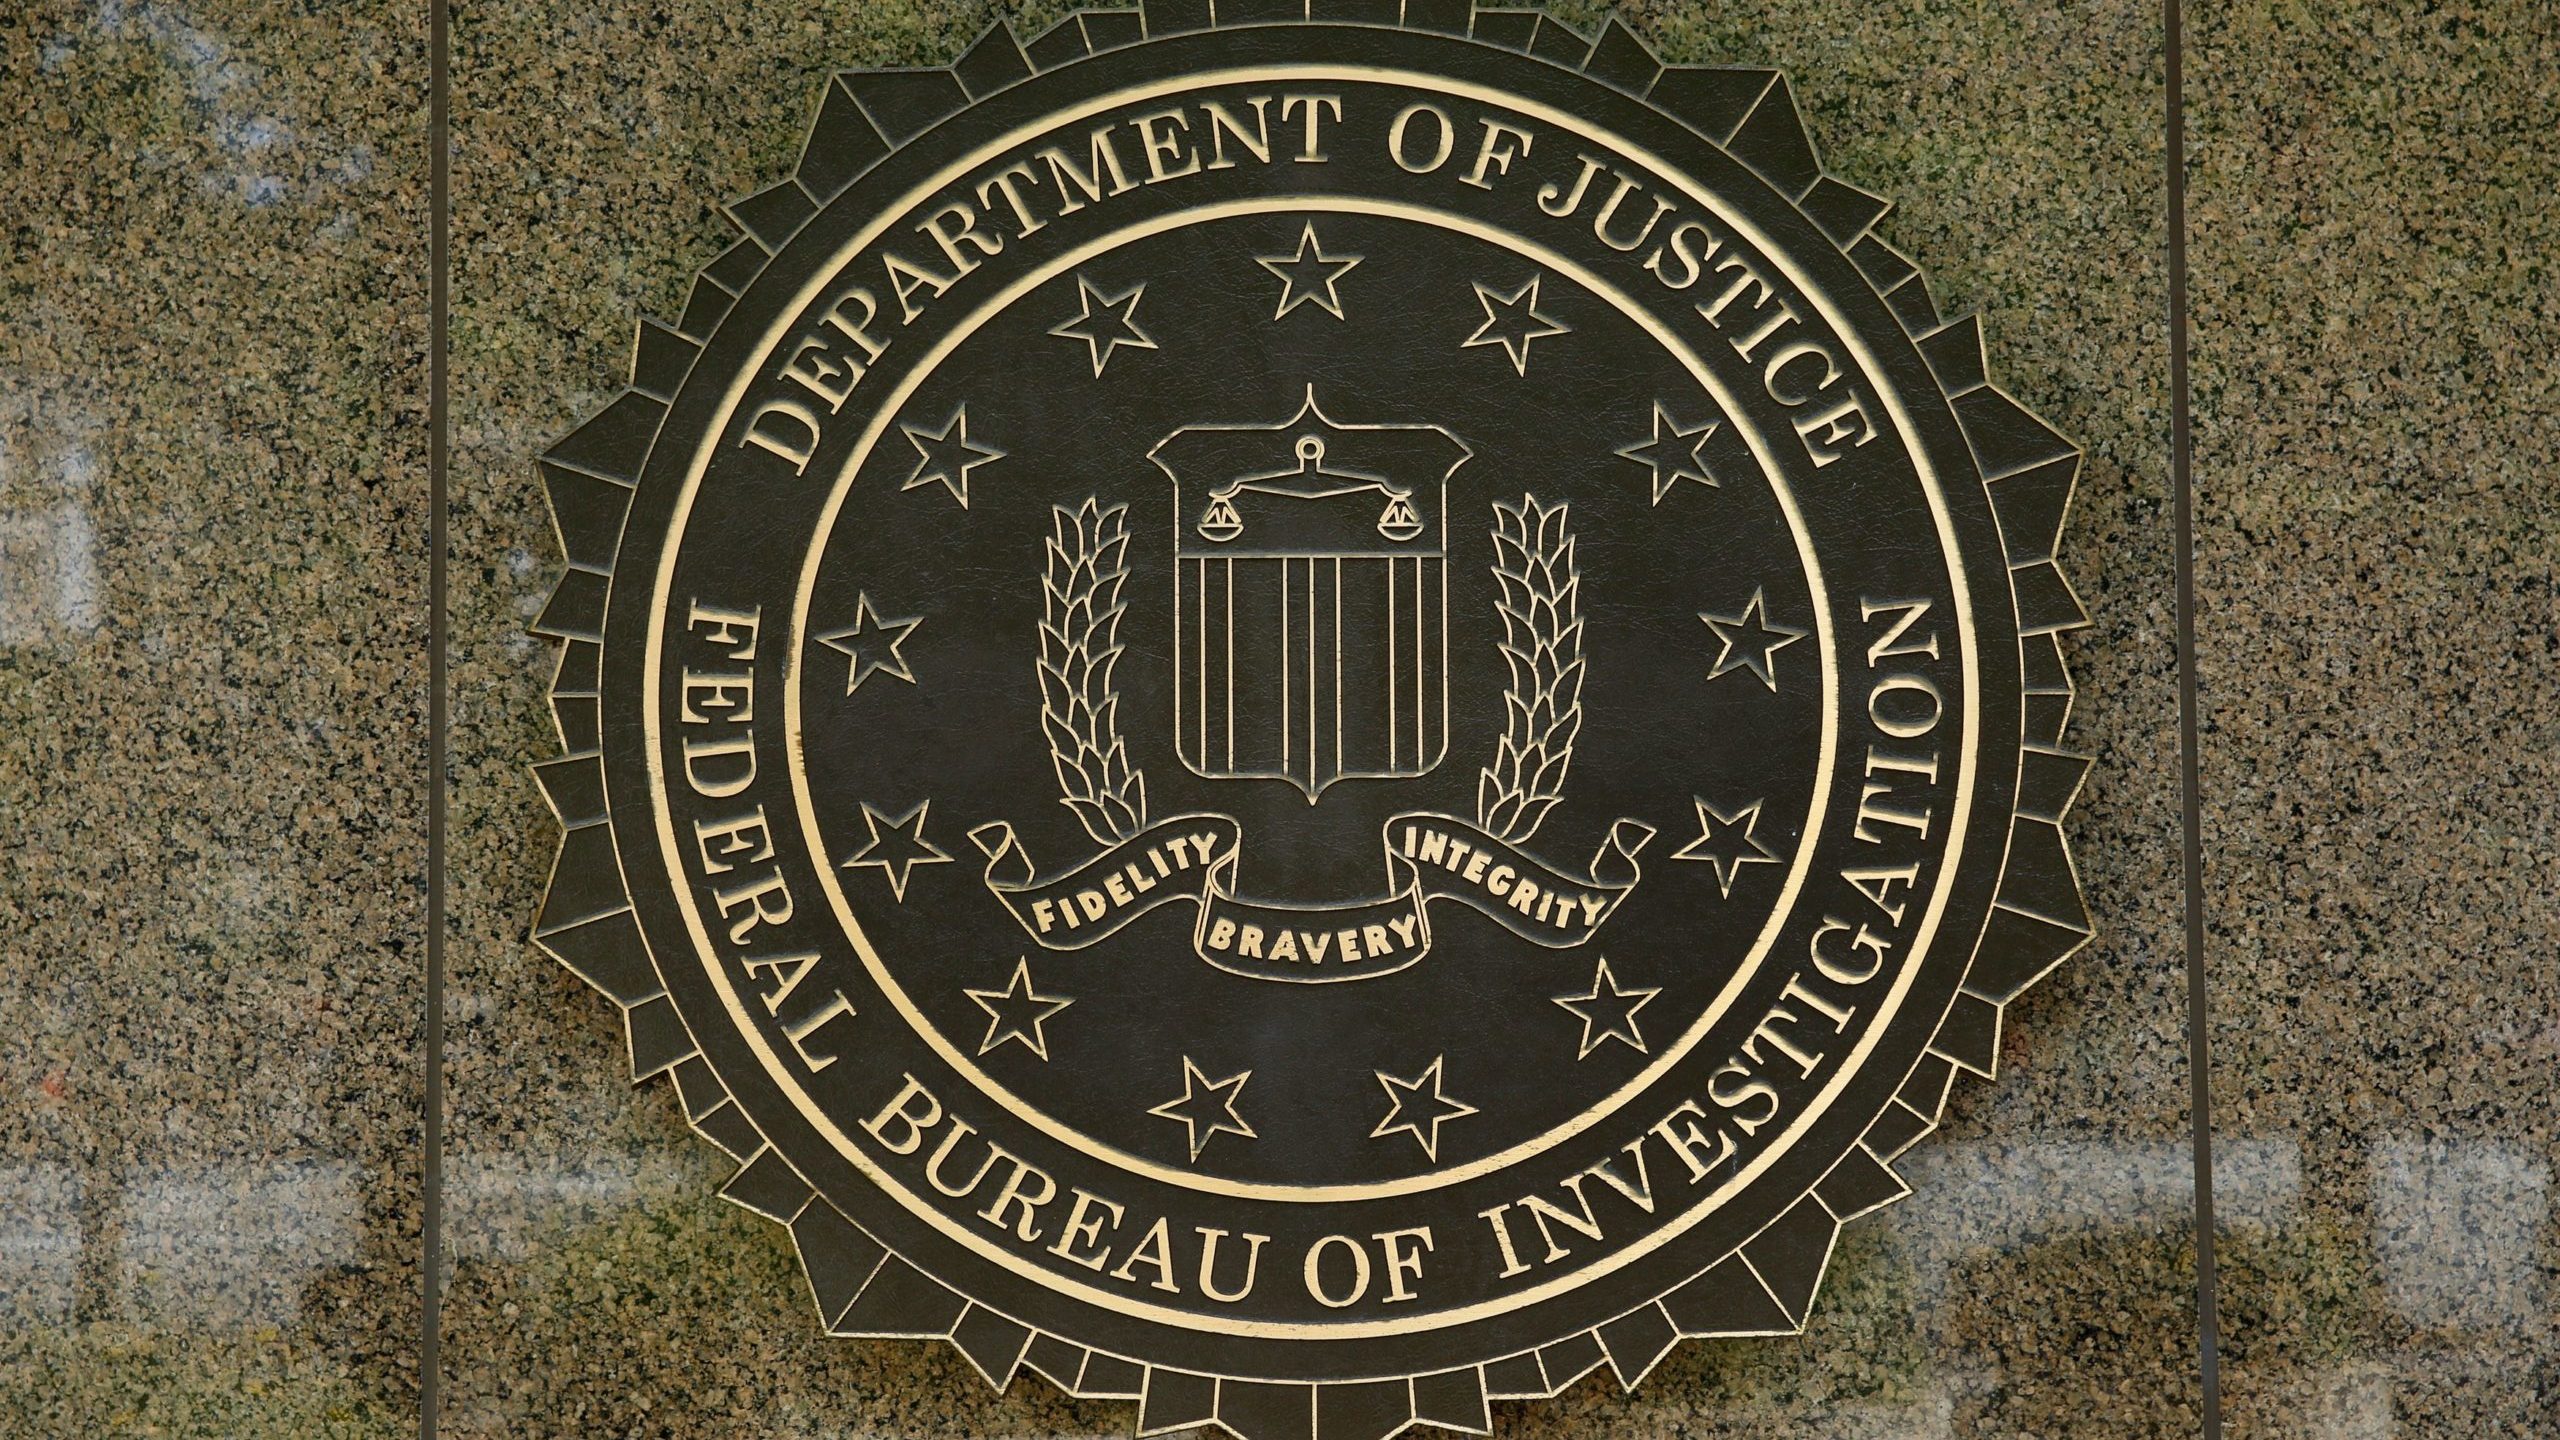 The FBI seal is seen outside the headquarters building in Washington, DC on July 5, 2016. - The FBI...